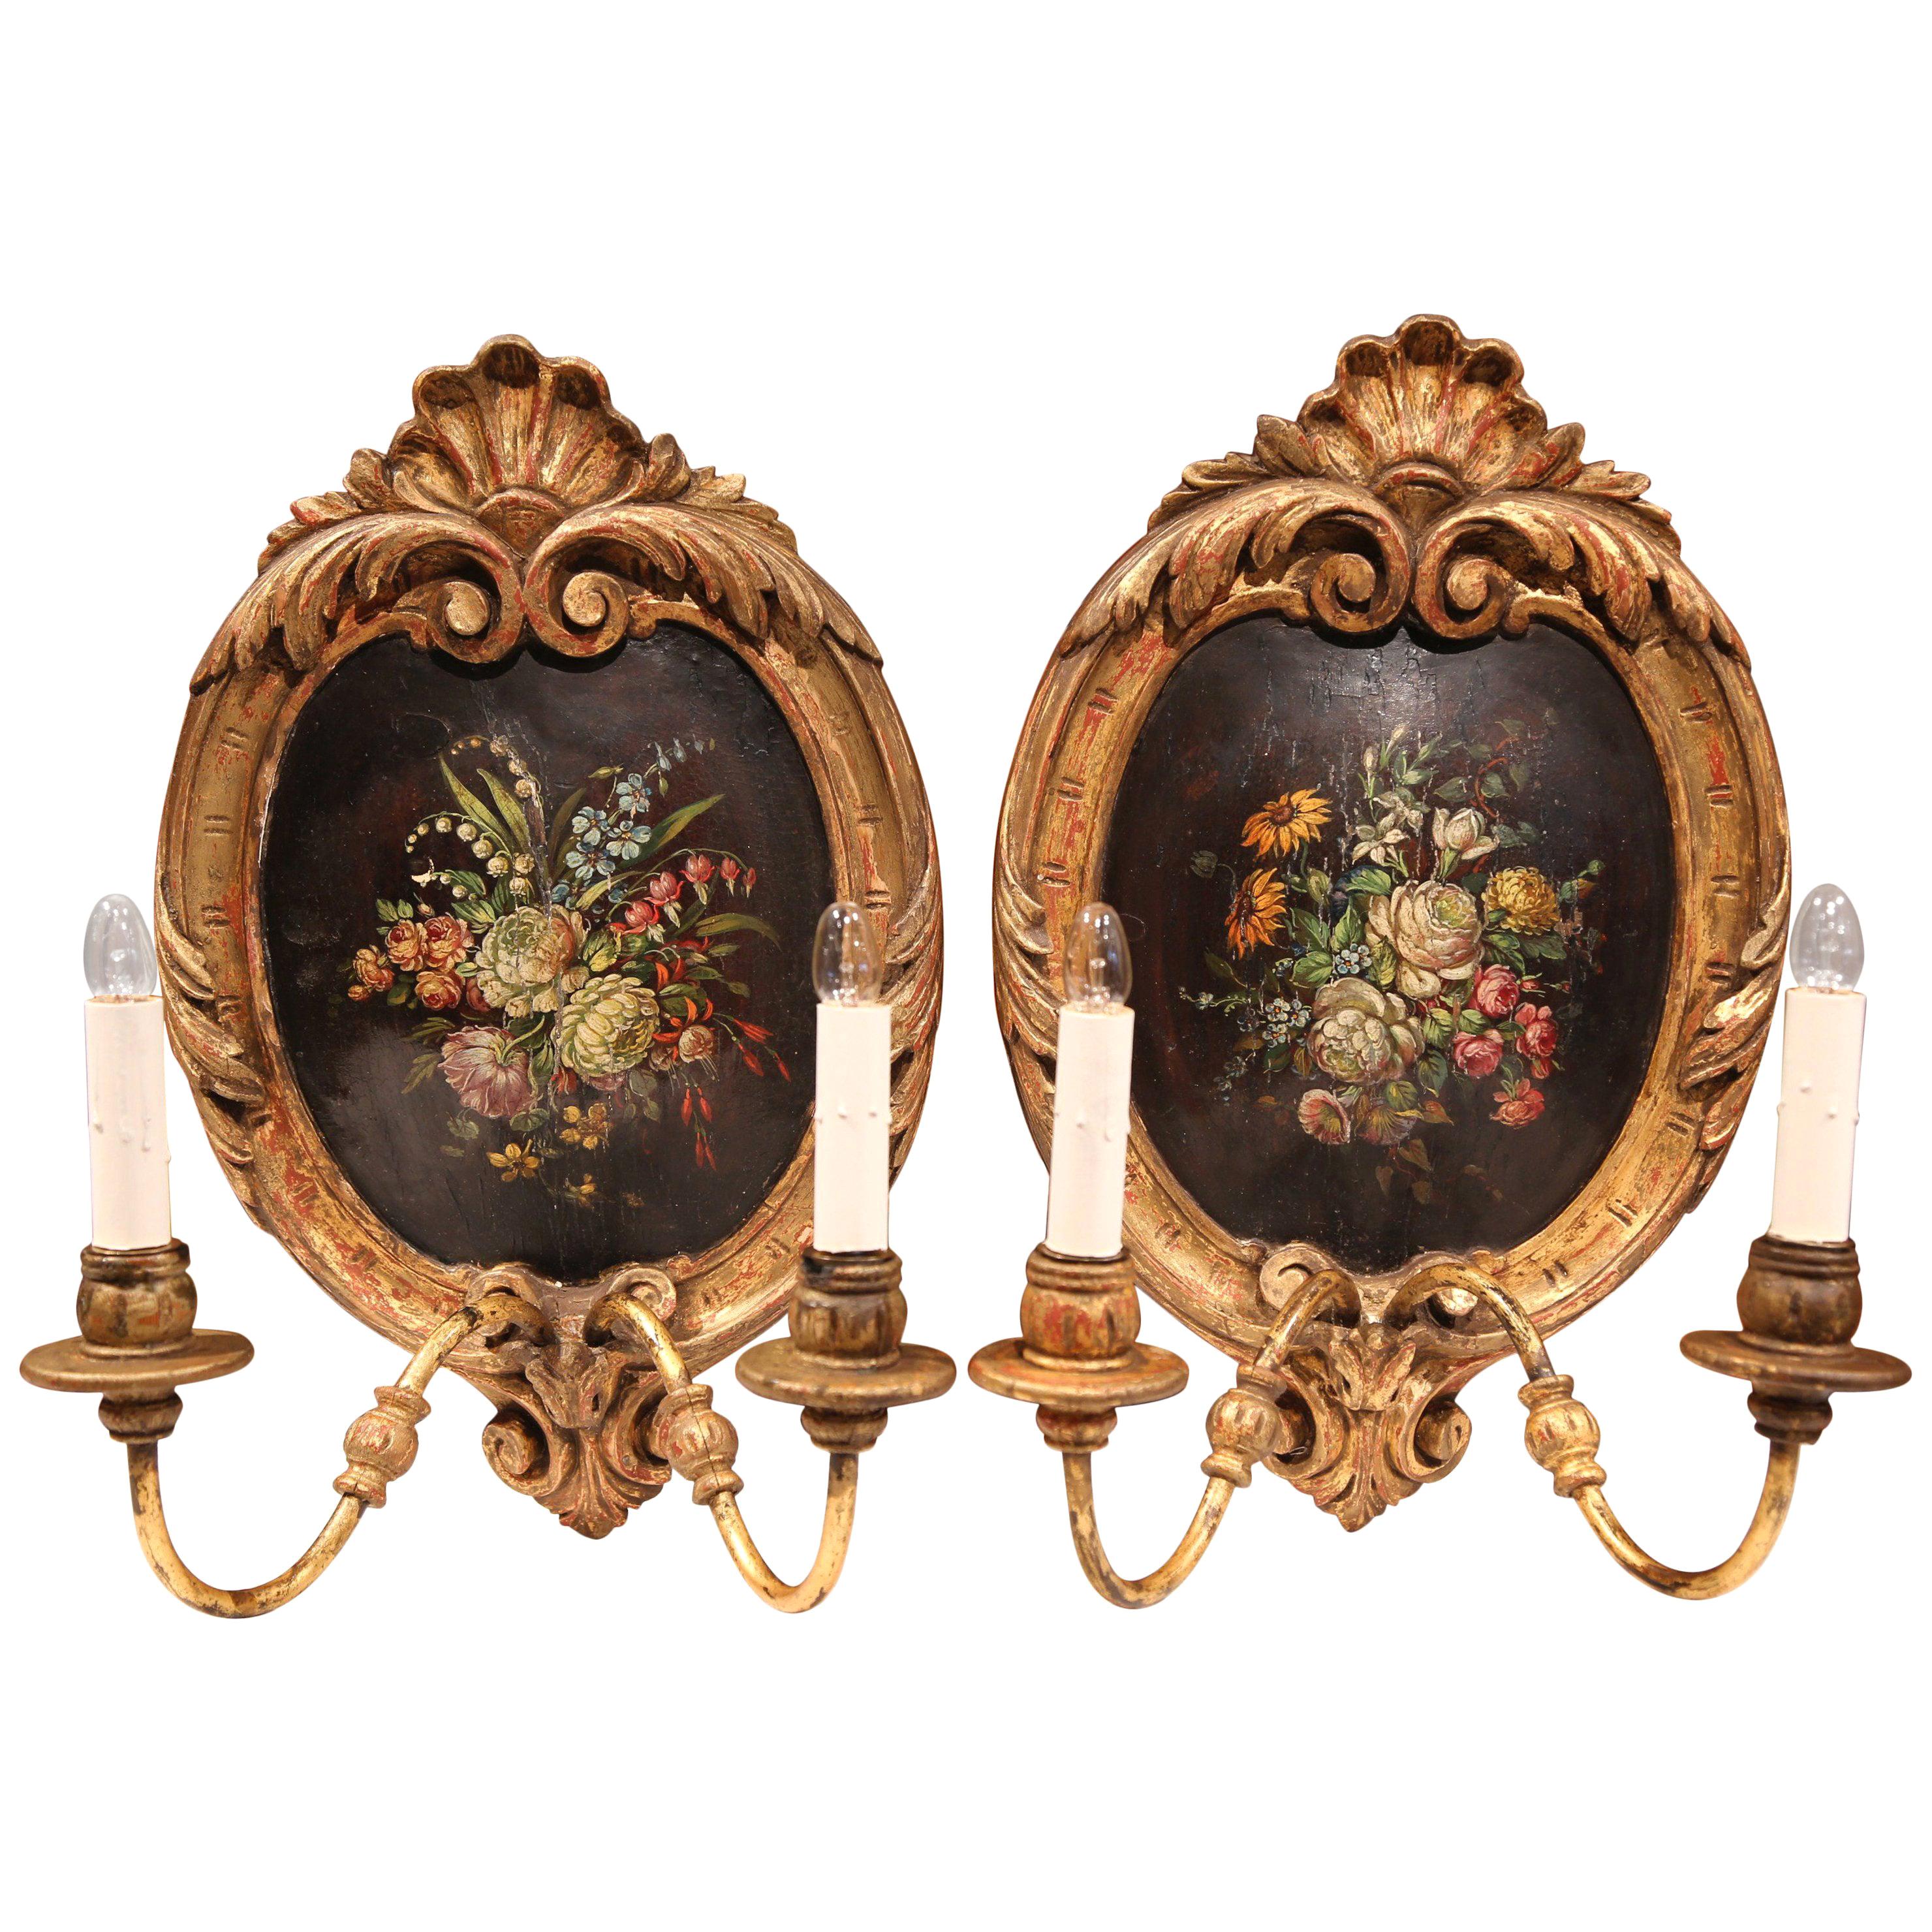 Pair of 19th Century French Carved Gilt Sconces with Painted Floral Medallions